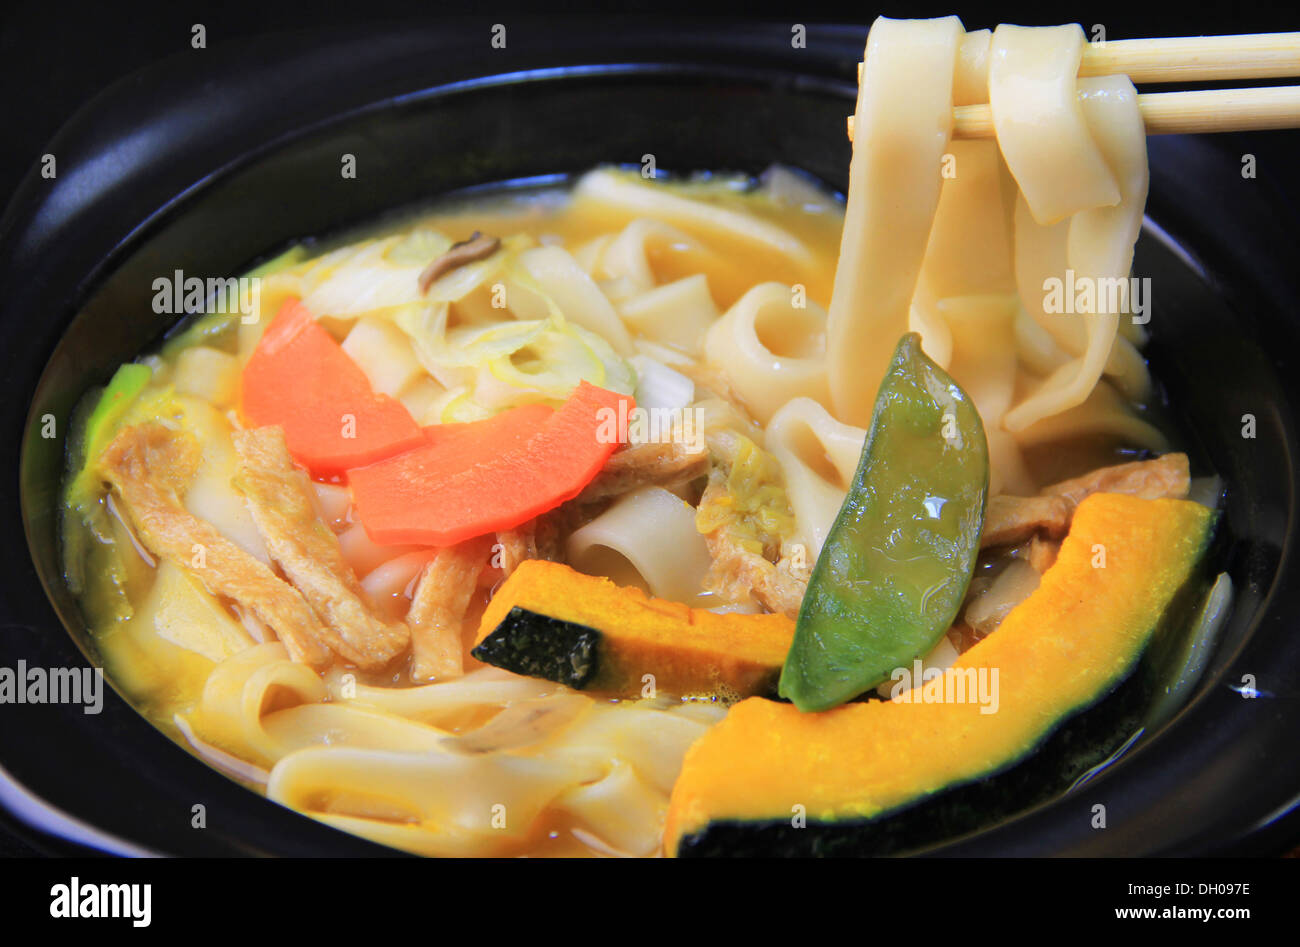 Hoto, Japanese Udon Noodles Hot Pot with Squash and Vegetables. Stock Image  - Image of mushroom, stew: 230912069